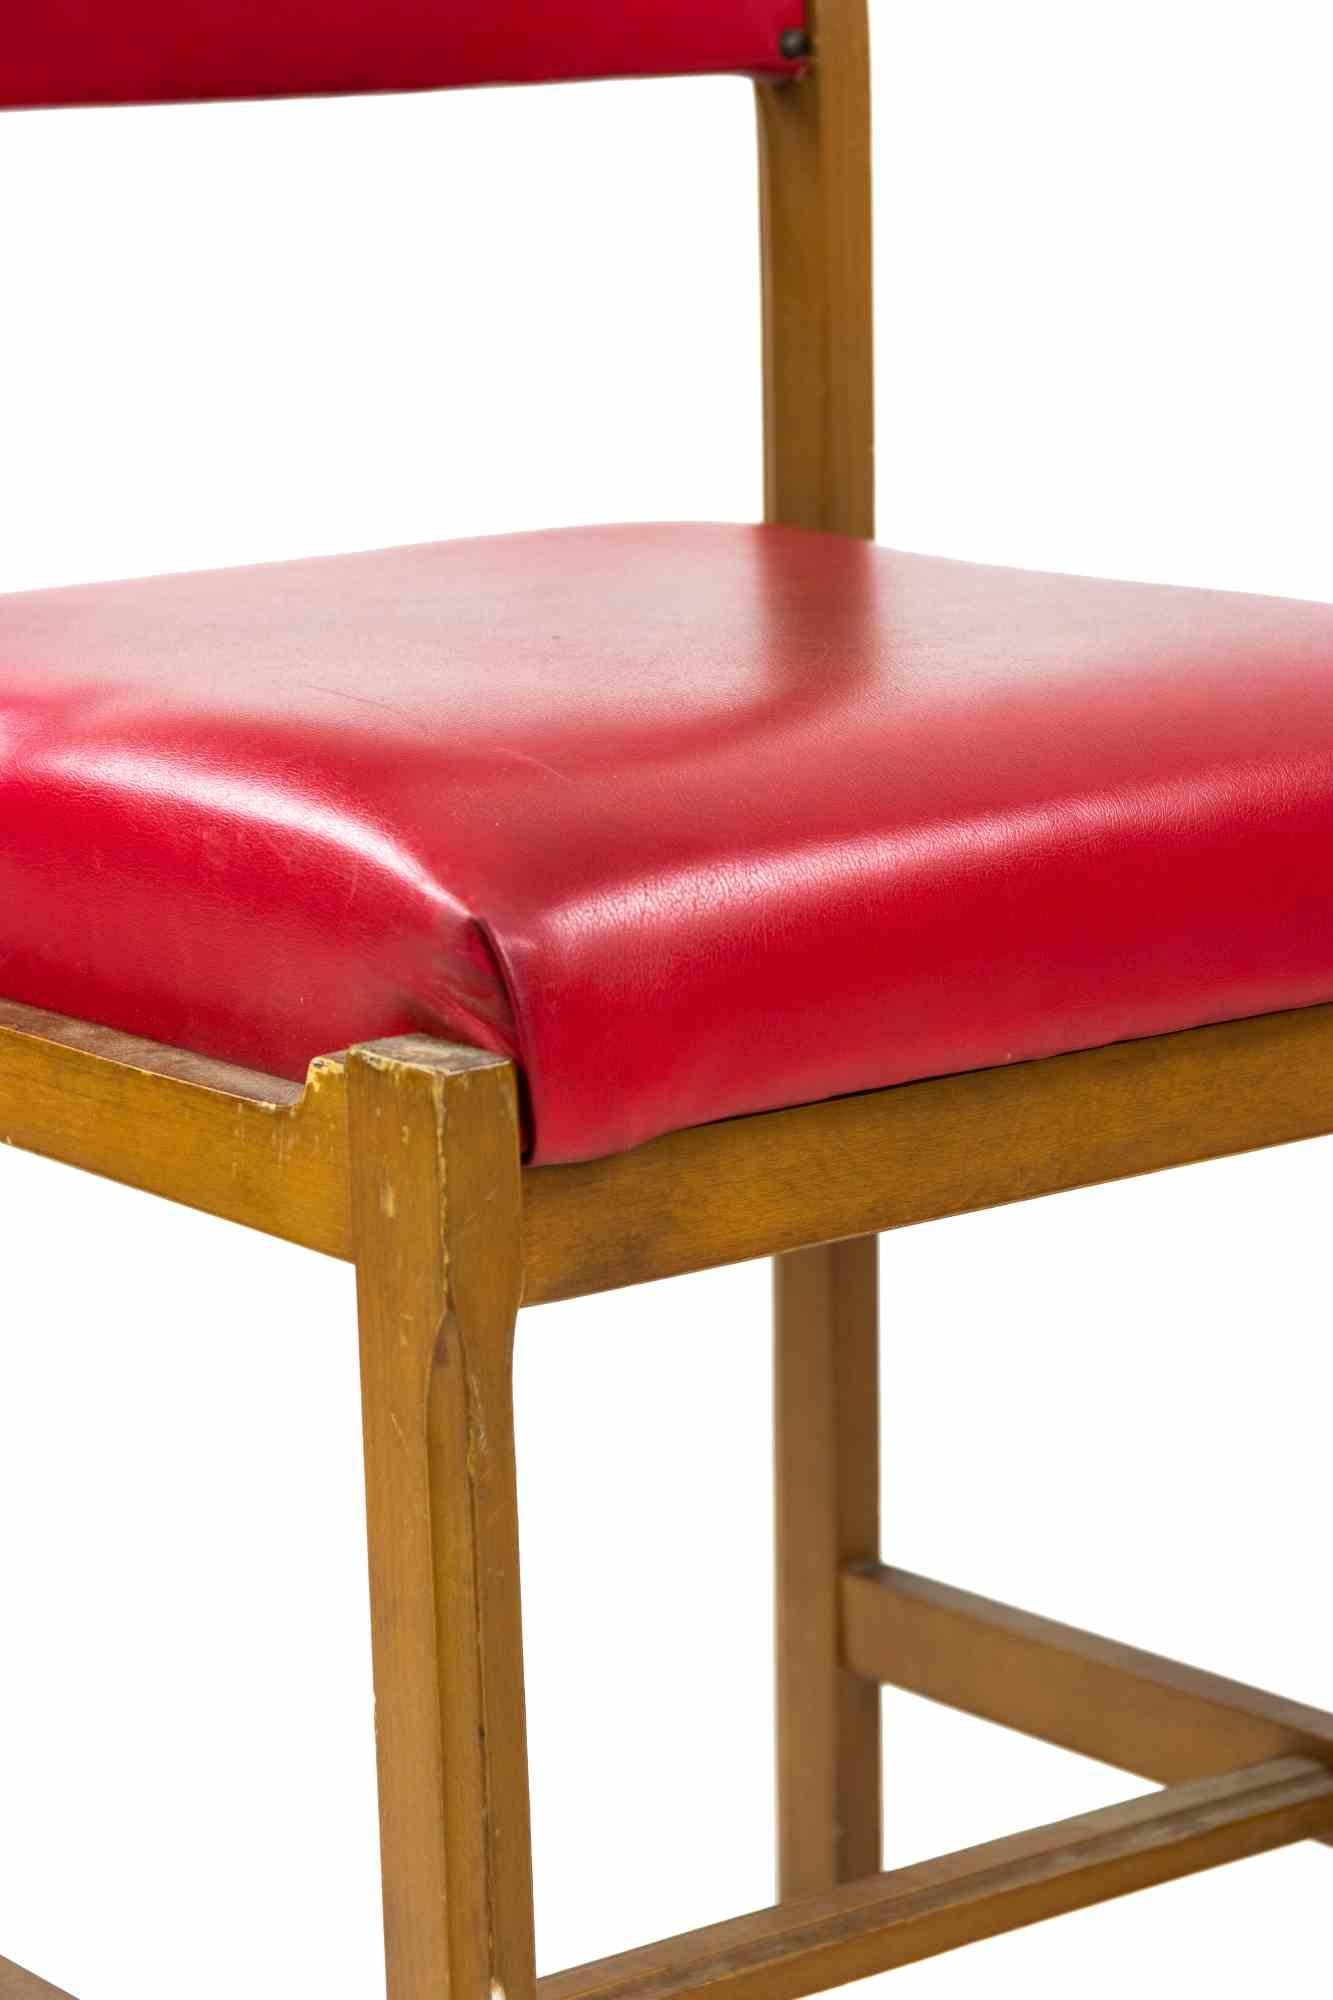 Set of red chairs is an original design furniture seating realized by Anonymous italian artist in the 1970 and attributed to MIM.

A set of six chairs covered in red leather and wood.

Mint conditions (some scratches and minor lacks).